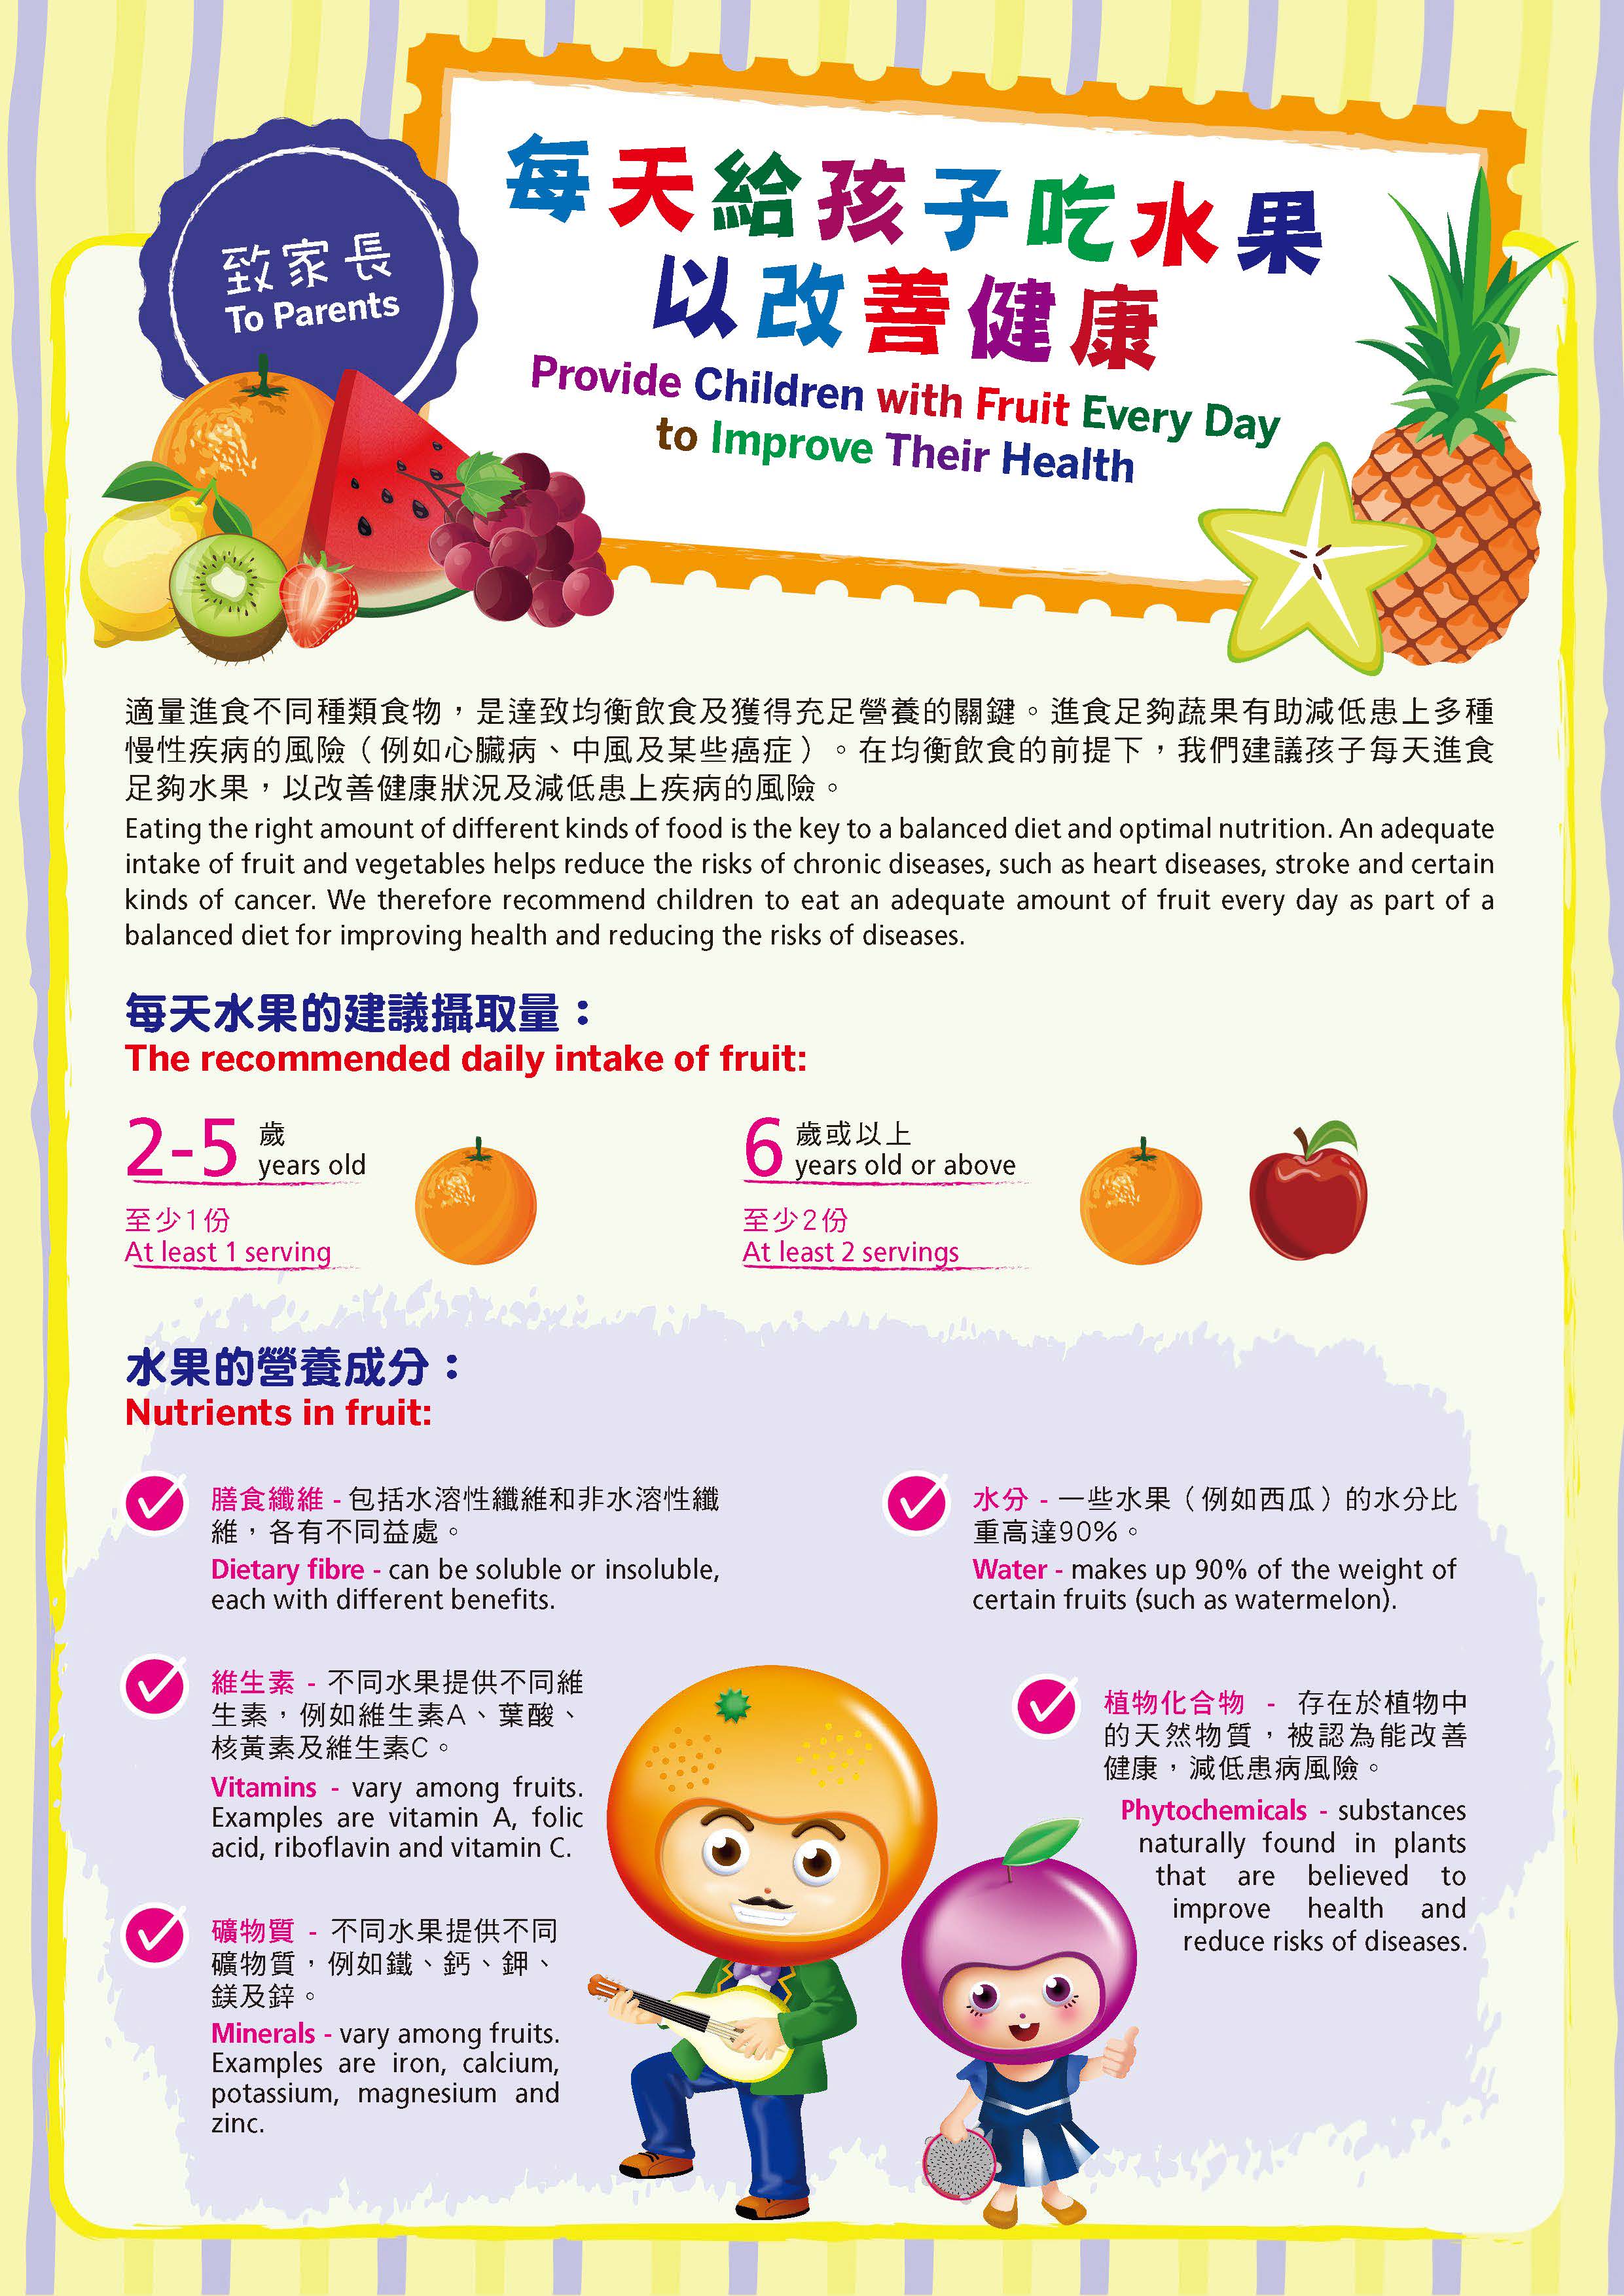 To Parents: Provide children with fruit every day to improve their health